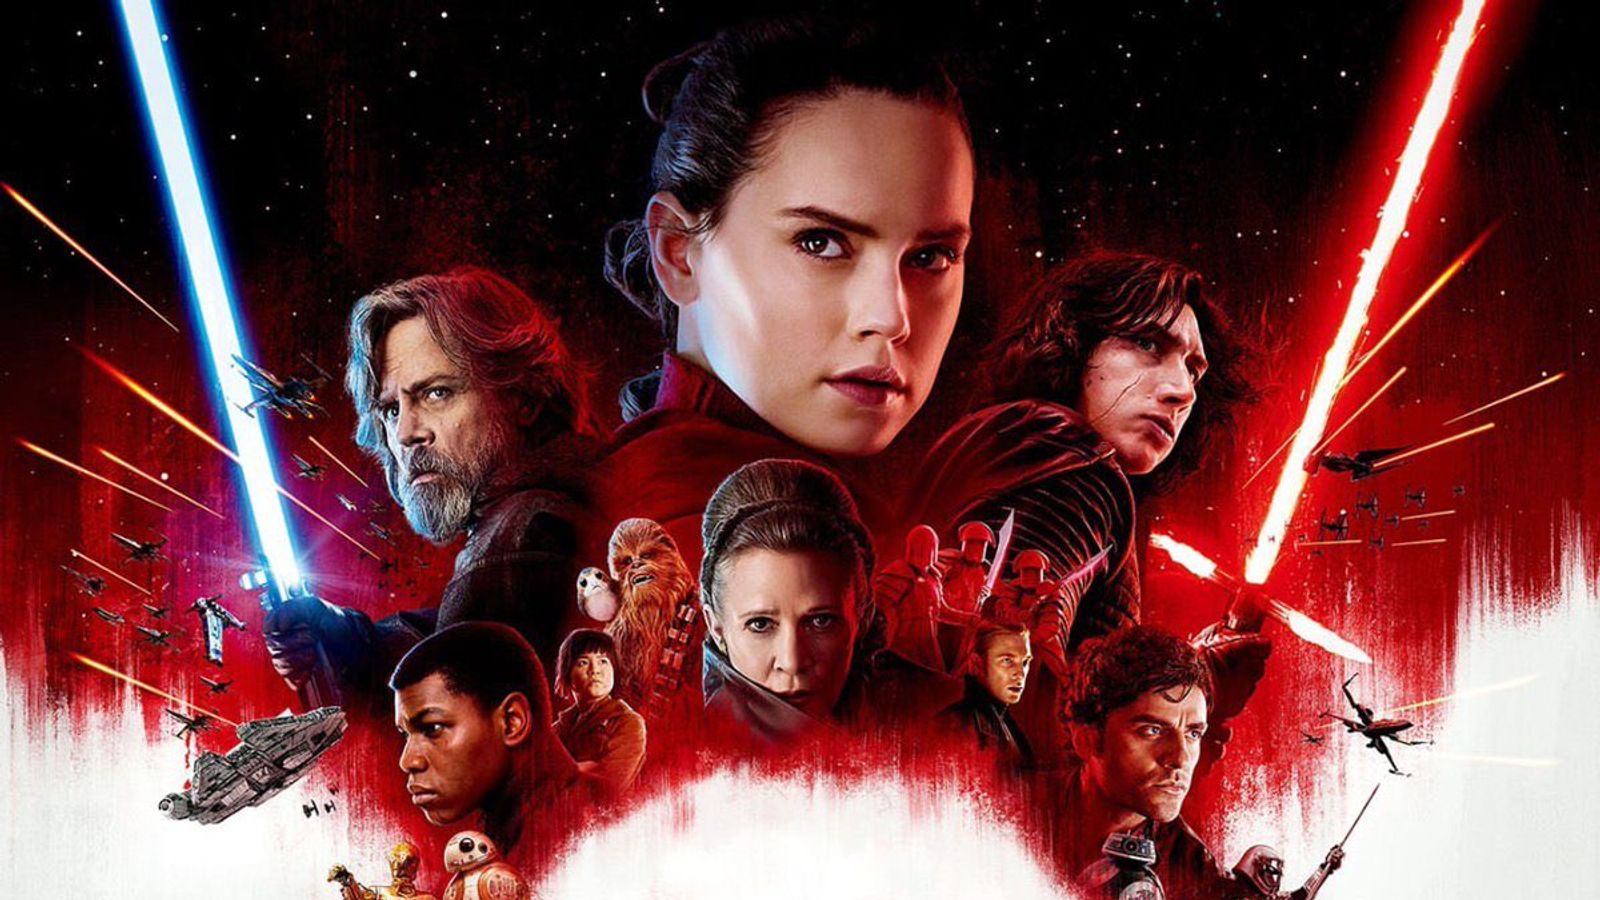 Star Wars: The Last Jedi earns $450m in opening weekend, Ents & Arts News